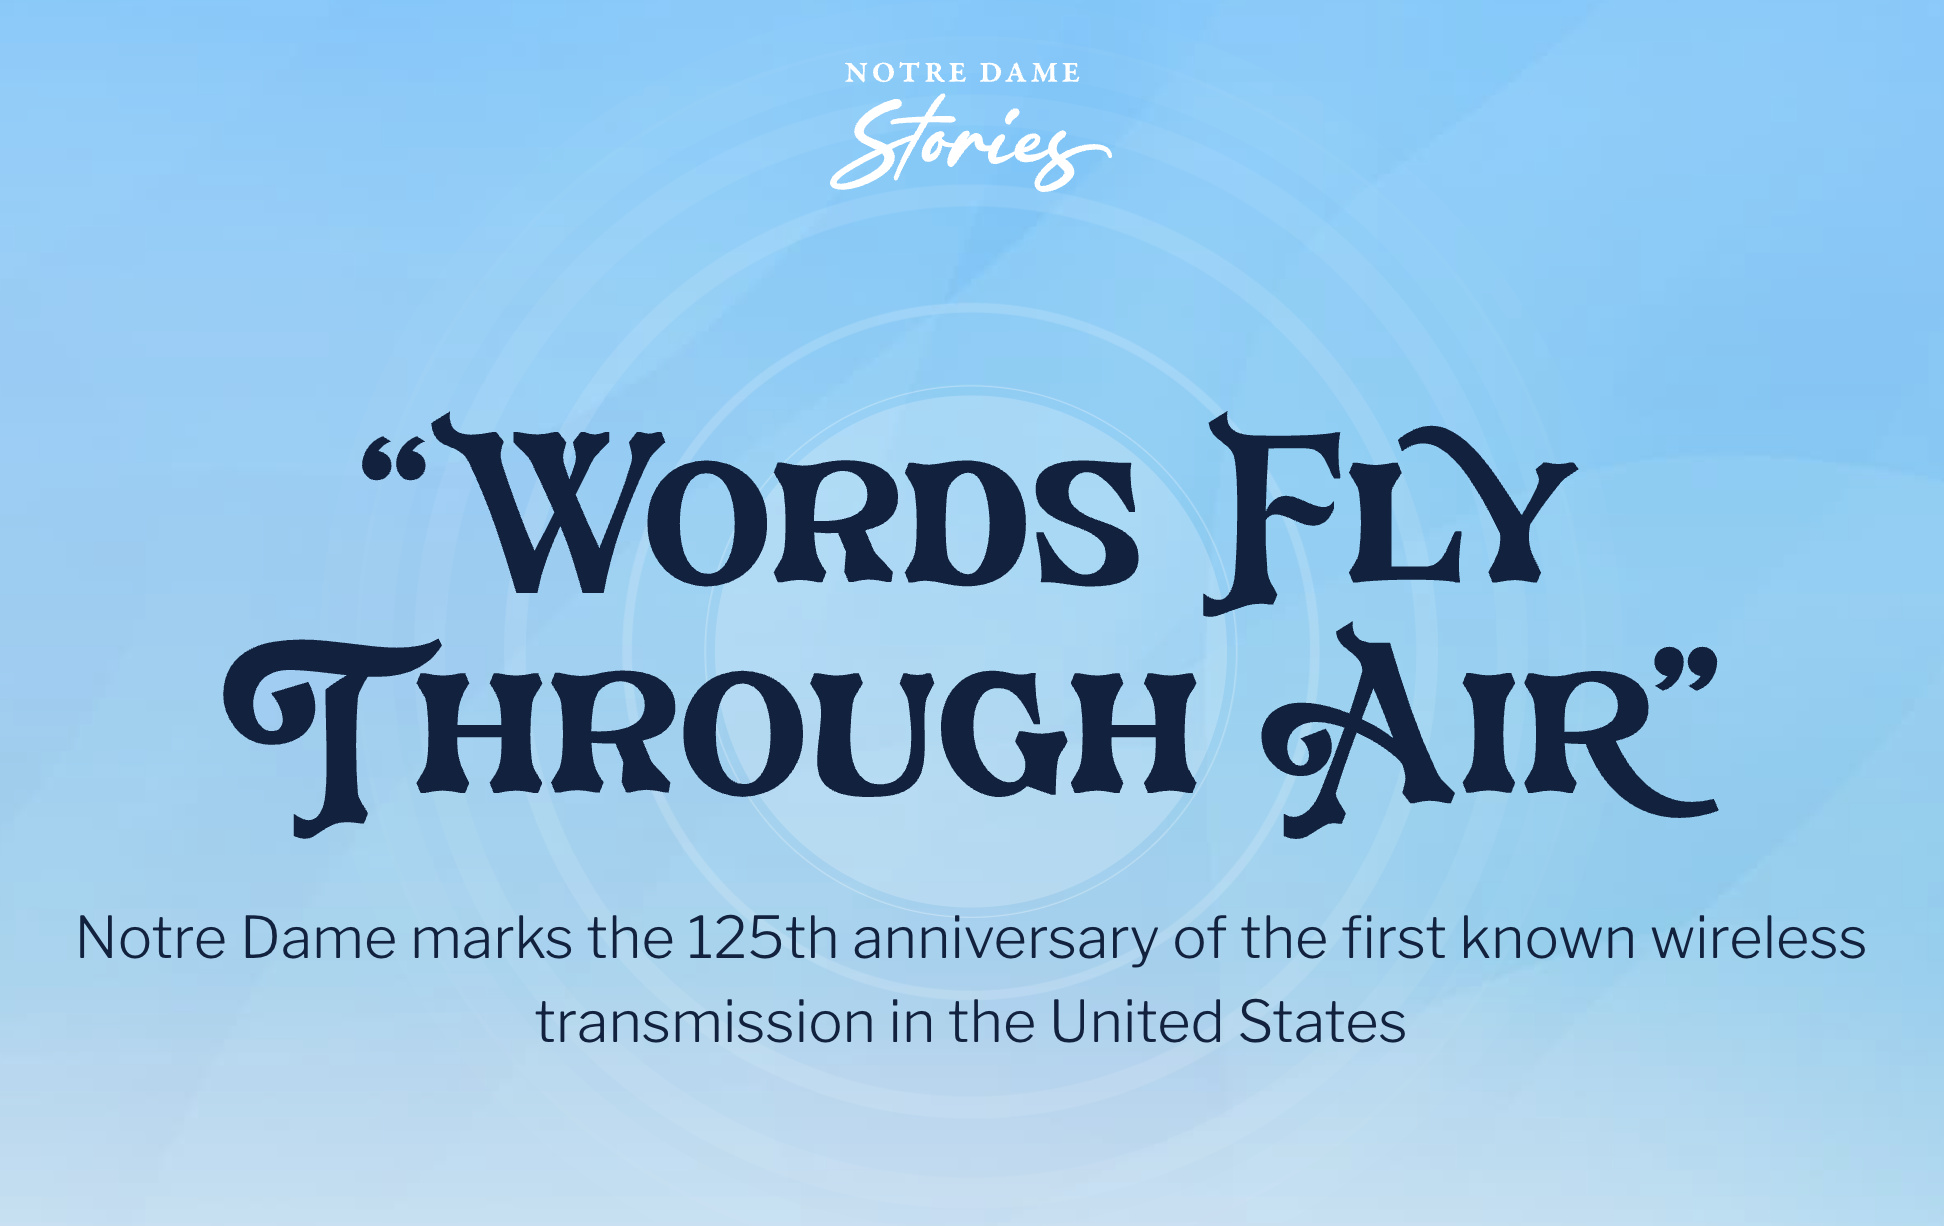 “Words Fly Through Air:” Notre Dame, SpectrumX’s lead institution, marks the 125th anniversary of the first known wireless transmission in the United States